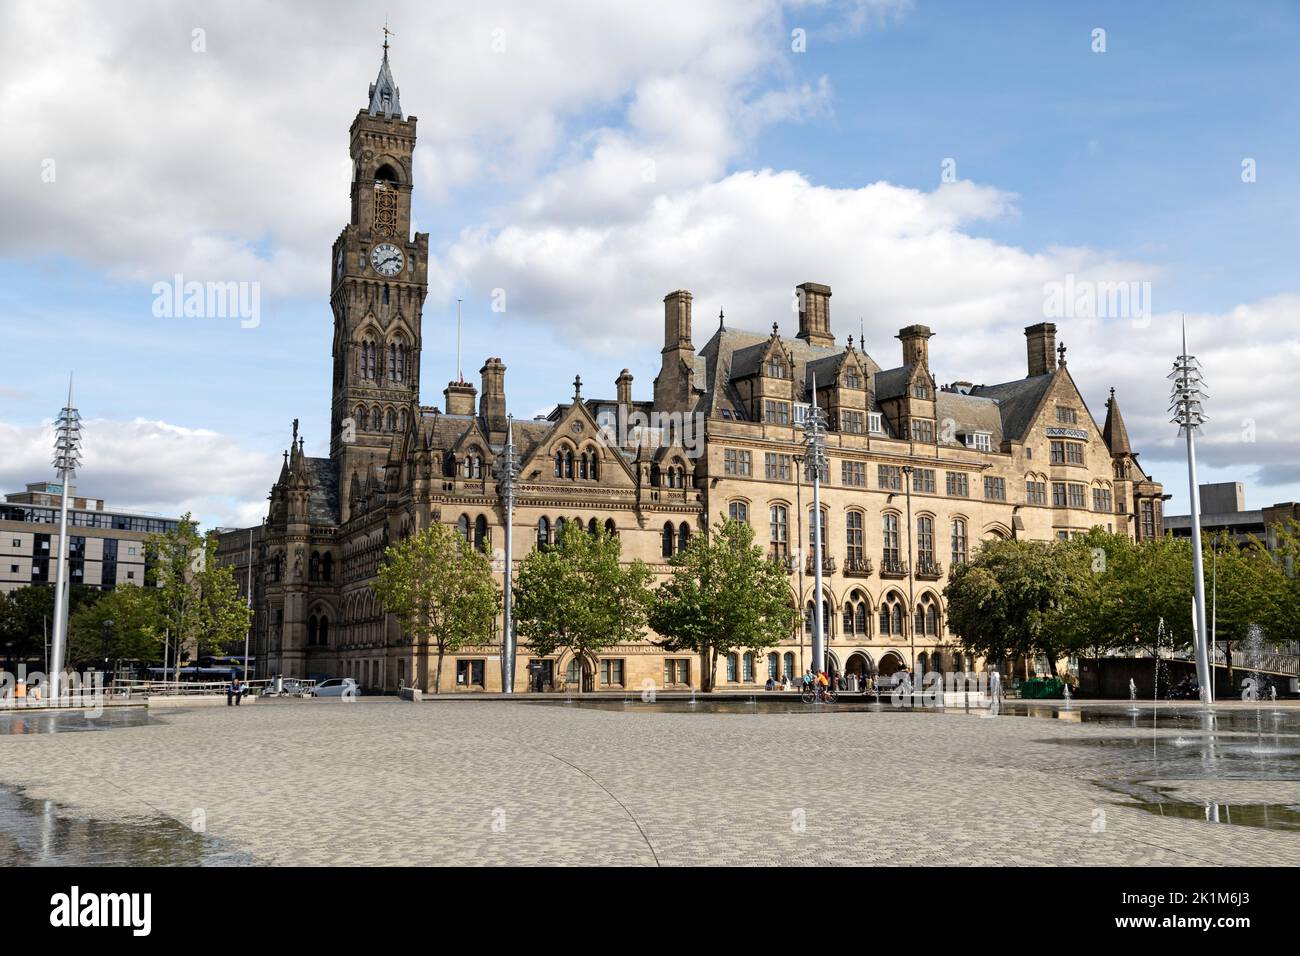 The City Hall in Bradford, West Yorkshire. The municipal building was designed by architects Lockwood and Mawson and stands at Centenary Square. Stock Photo